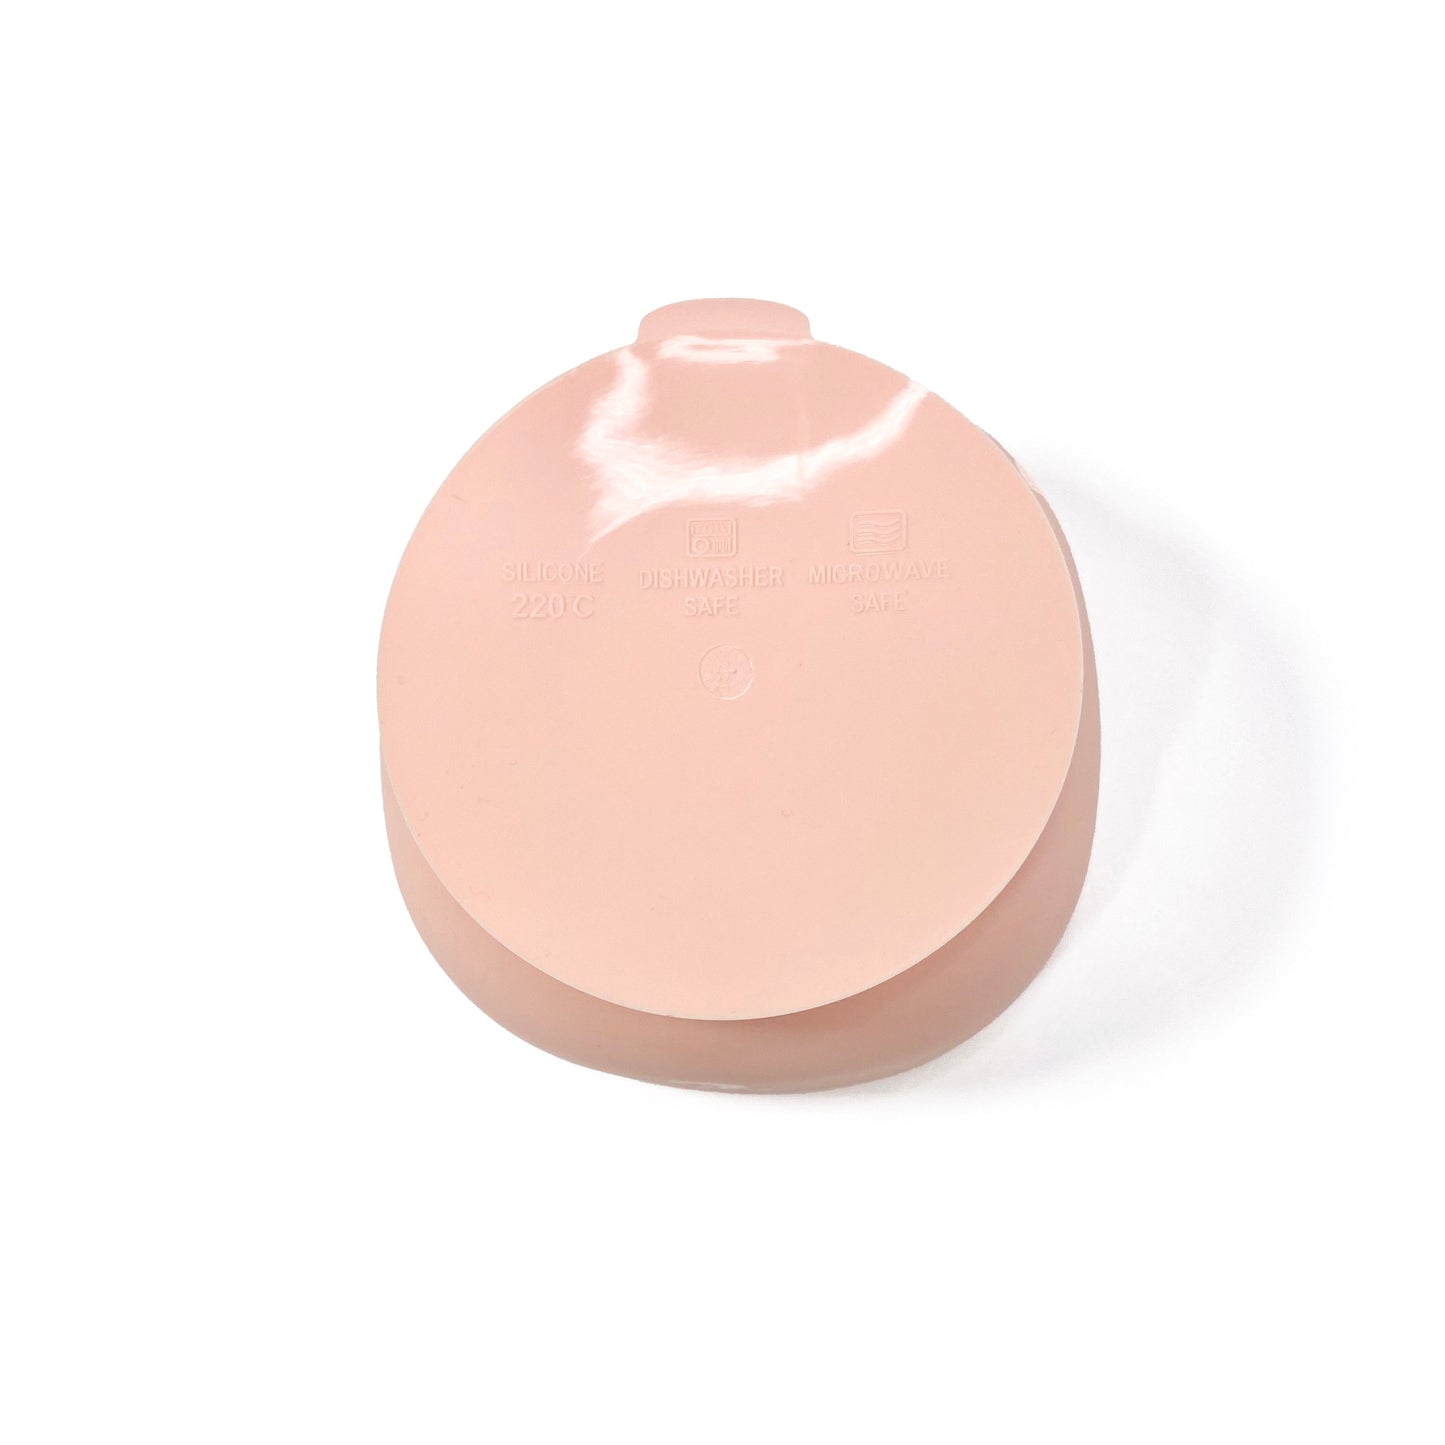 A peachy pink silicone children’s feeding bowl with suction cup on the base. View shows the underside of the bowl.